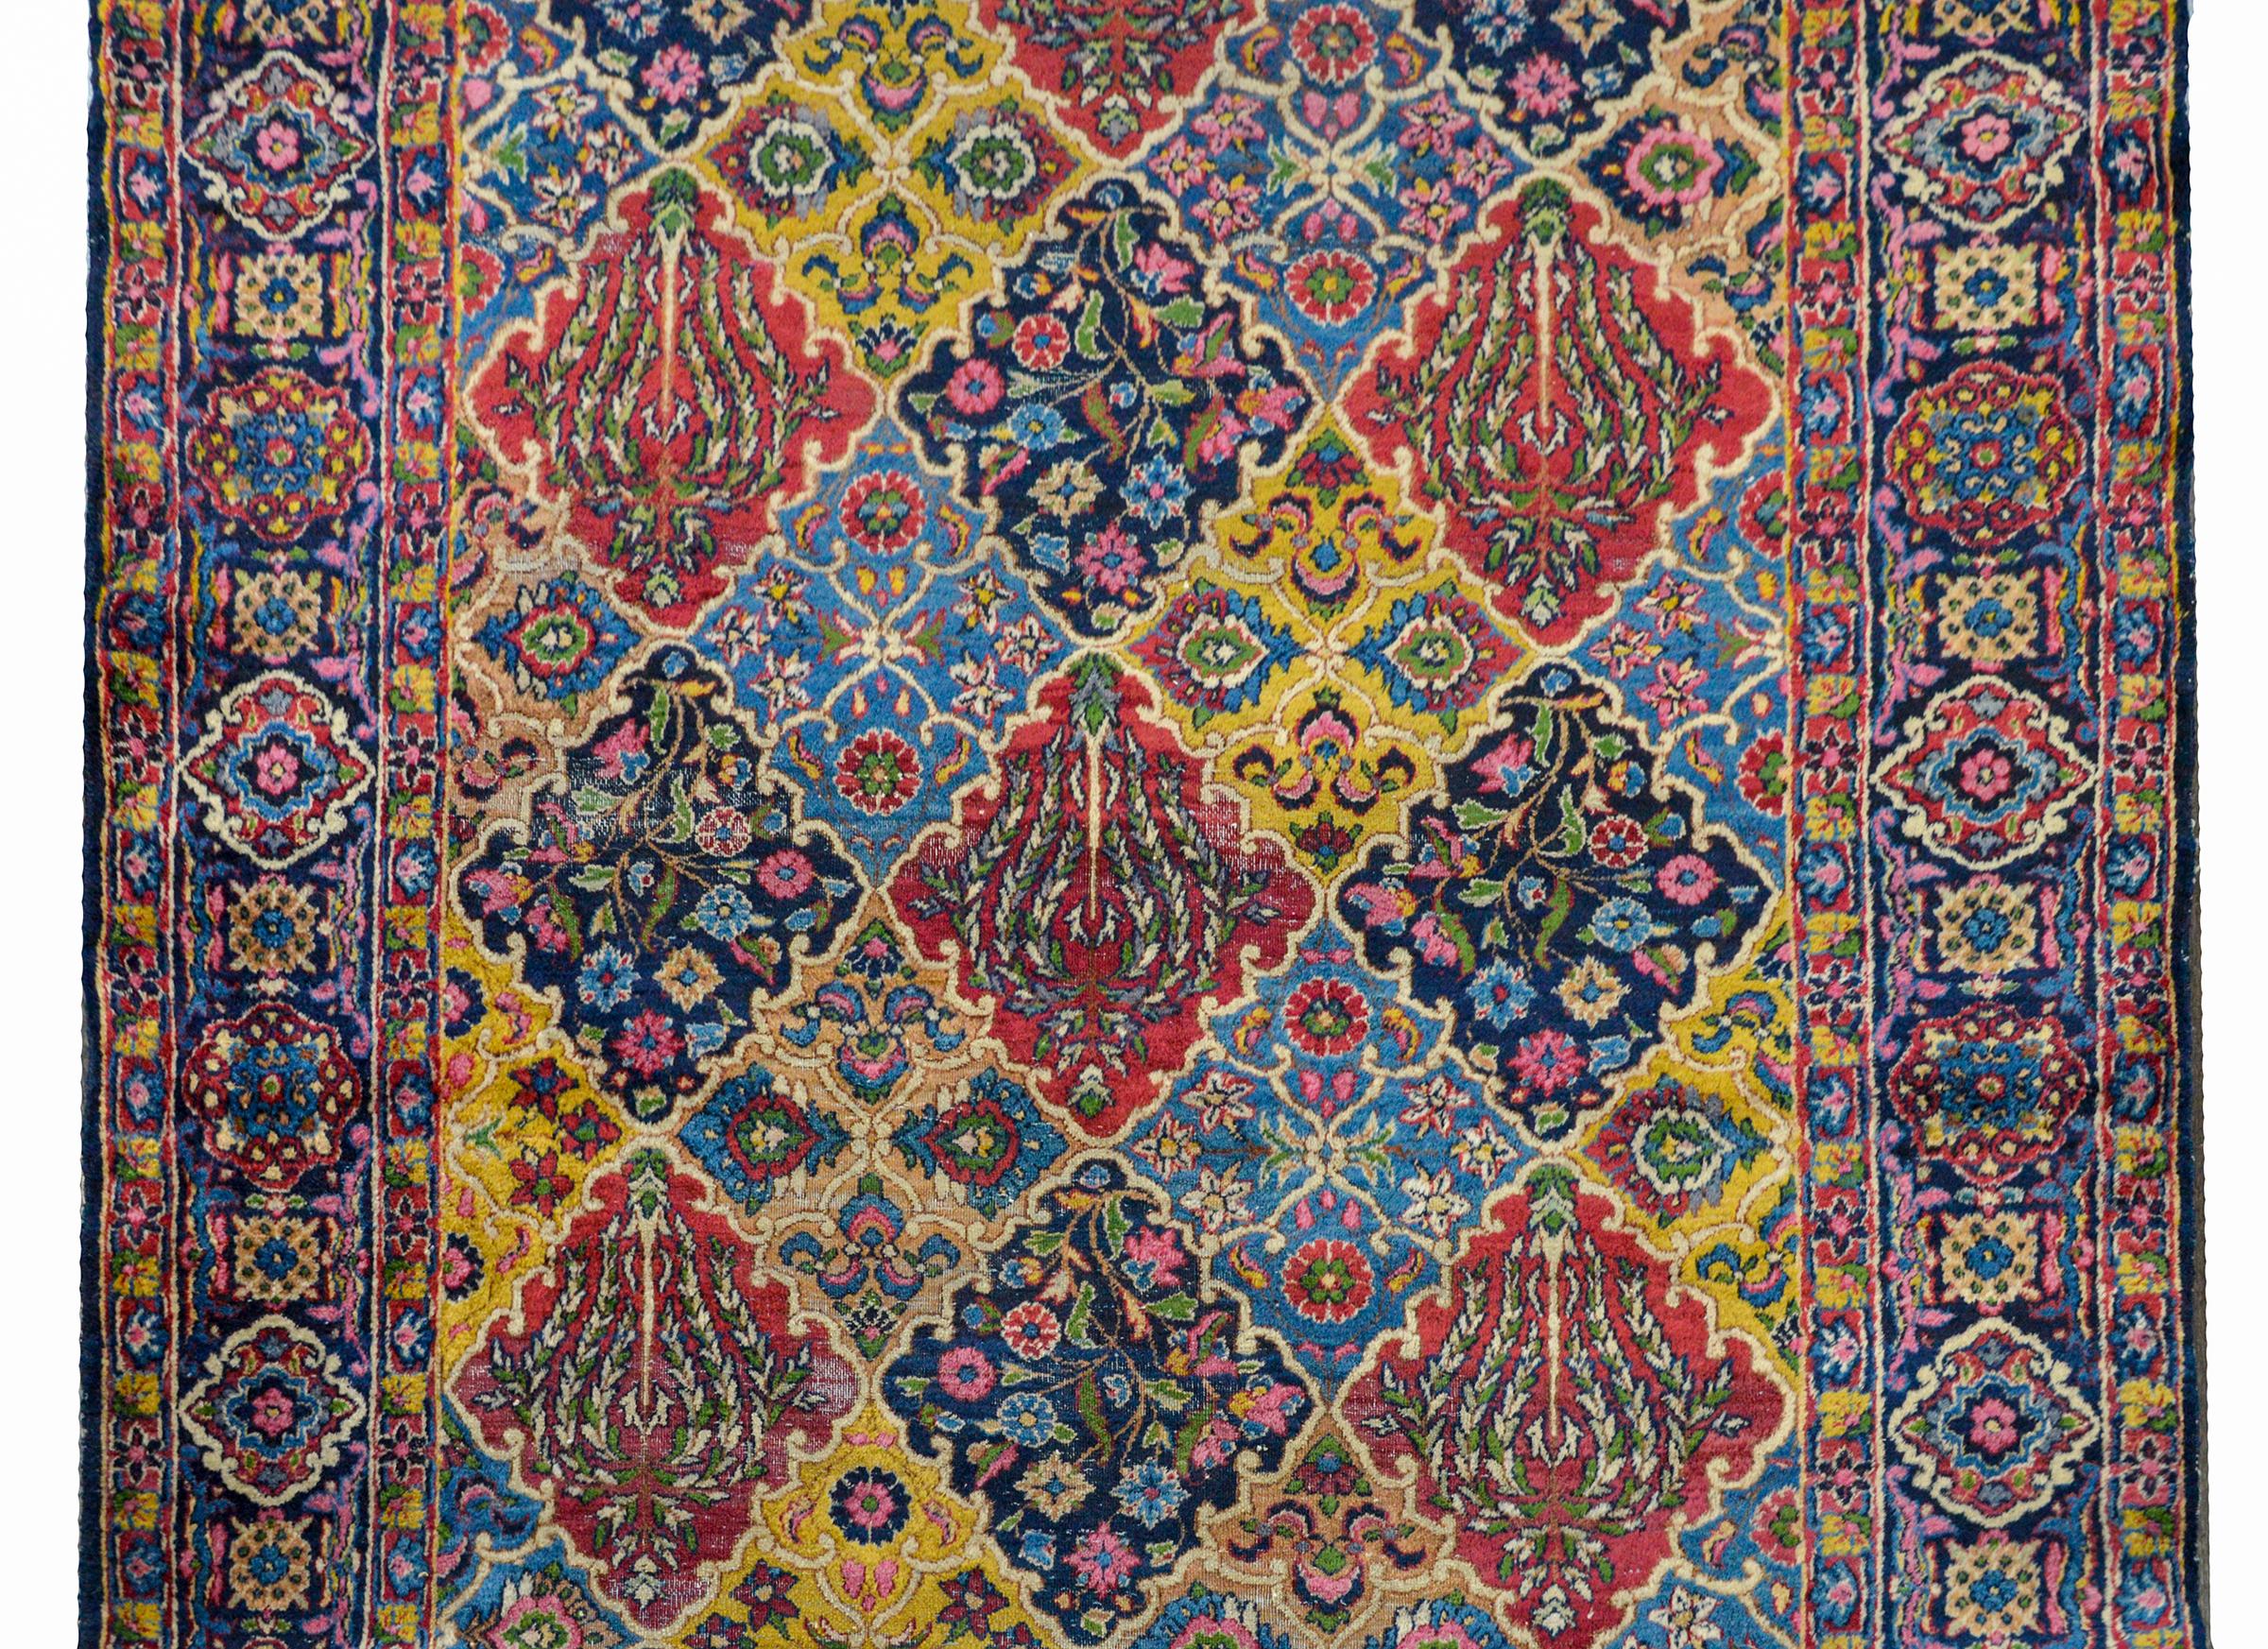 A whimsical early 20th century Persian Yazd runner with a patchwork pattern of myriad flowers and trees-of-life woven in many colors including crimson, light and dark indigo, gold, cream, and pink. The border is unique with a repeated geometric and